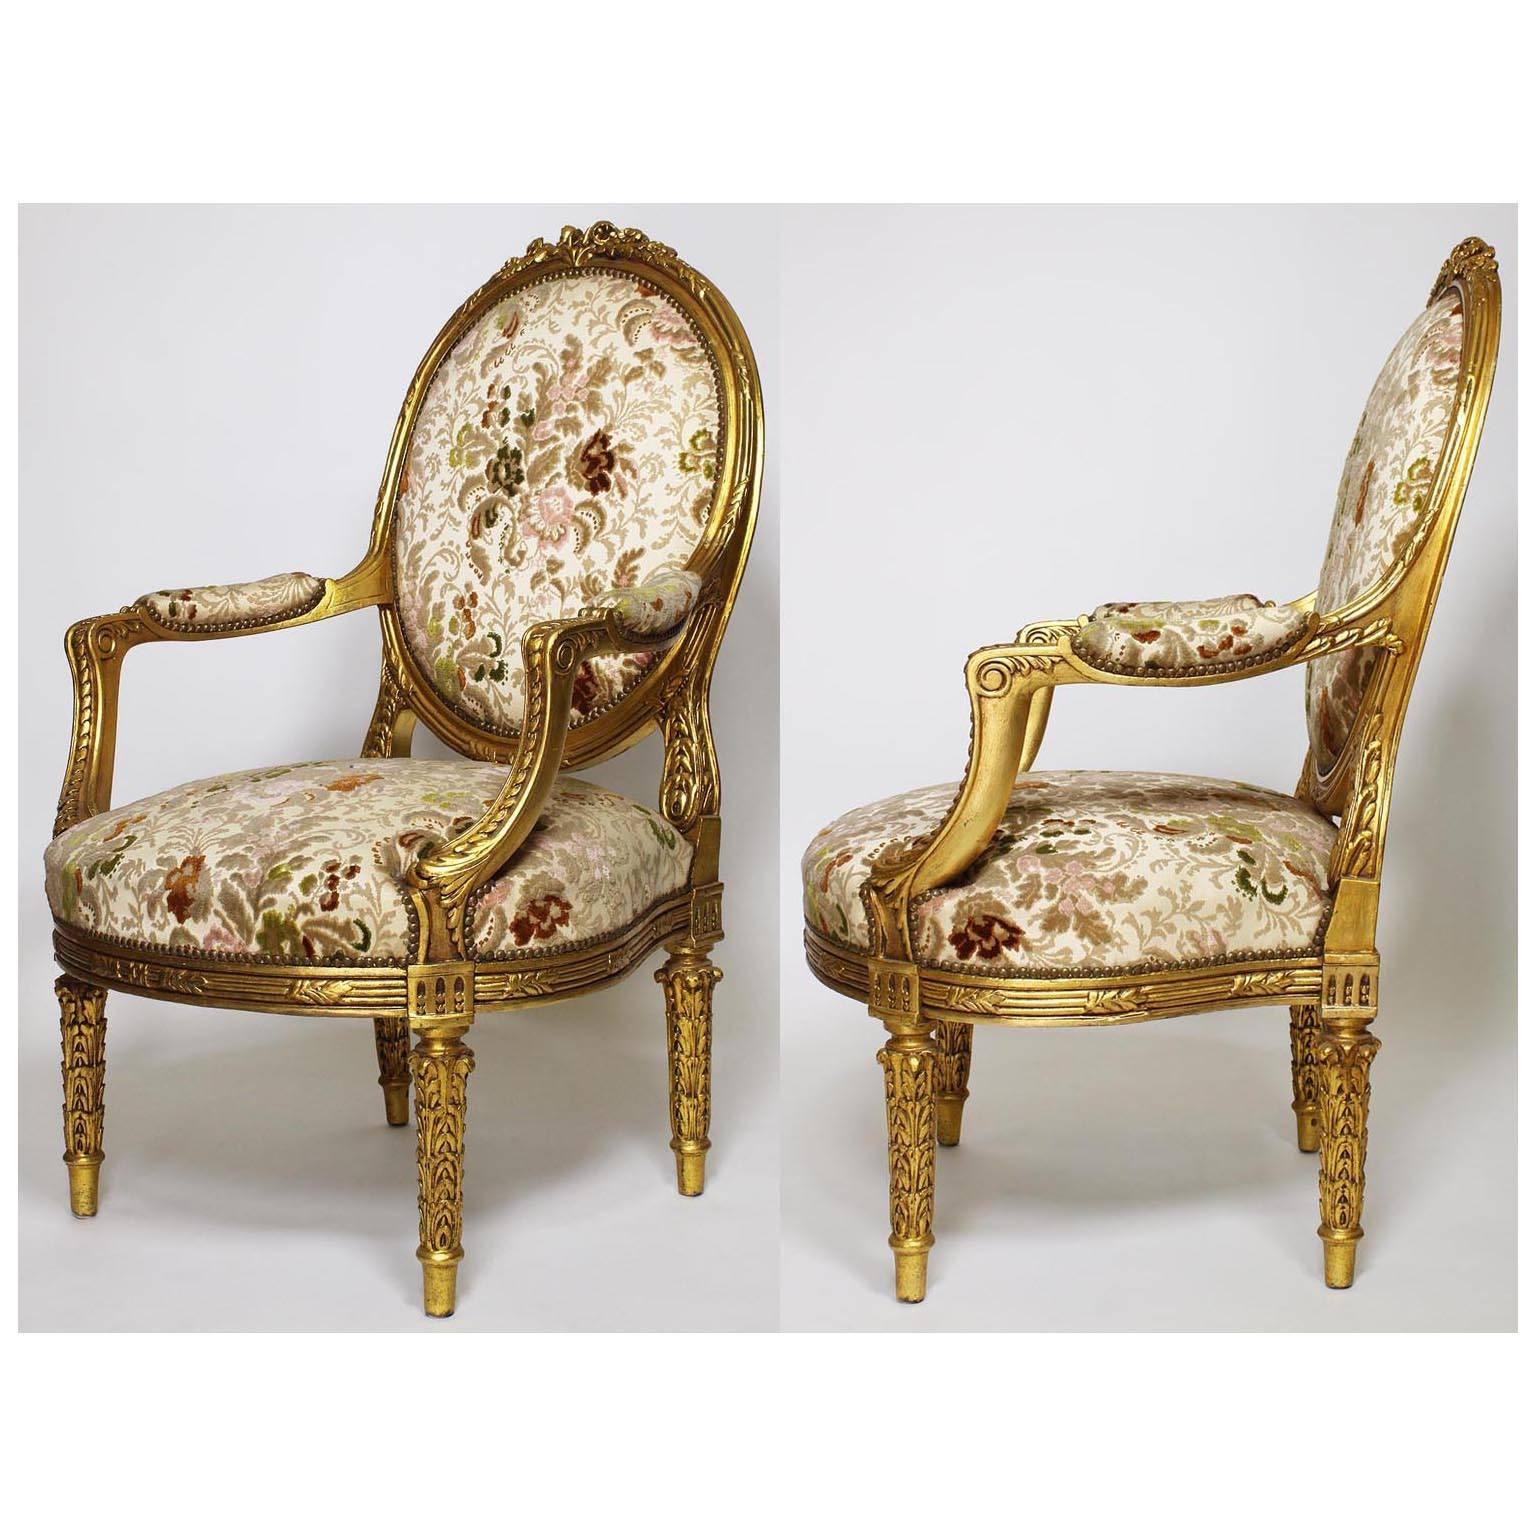 Early 20th Century French 19th-20th Century Louis XV Style Giltwood Carved Five-Piece Salon Suite For Sale